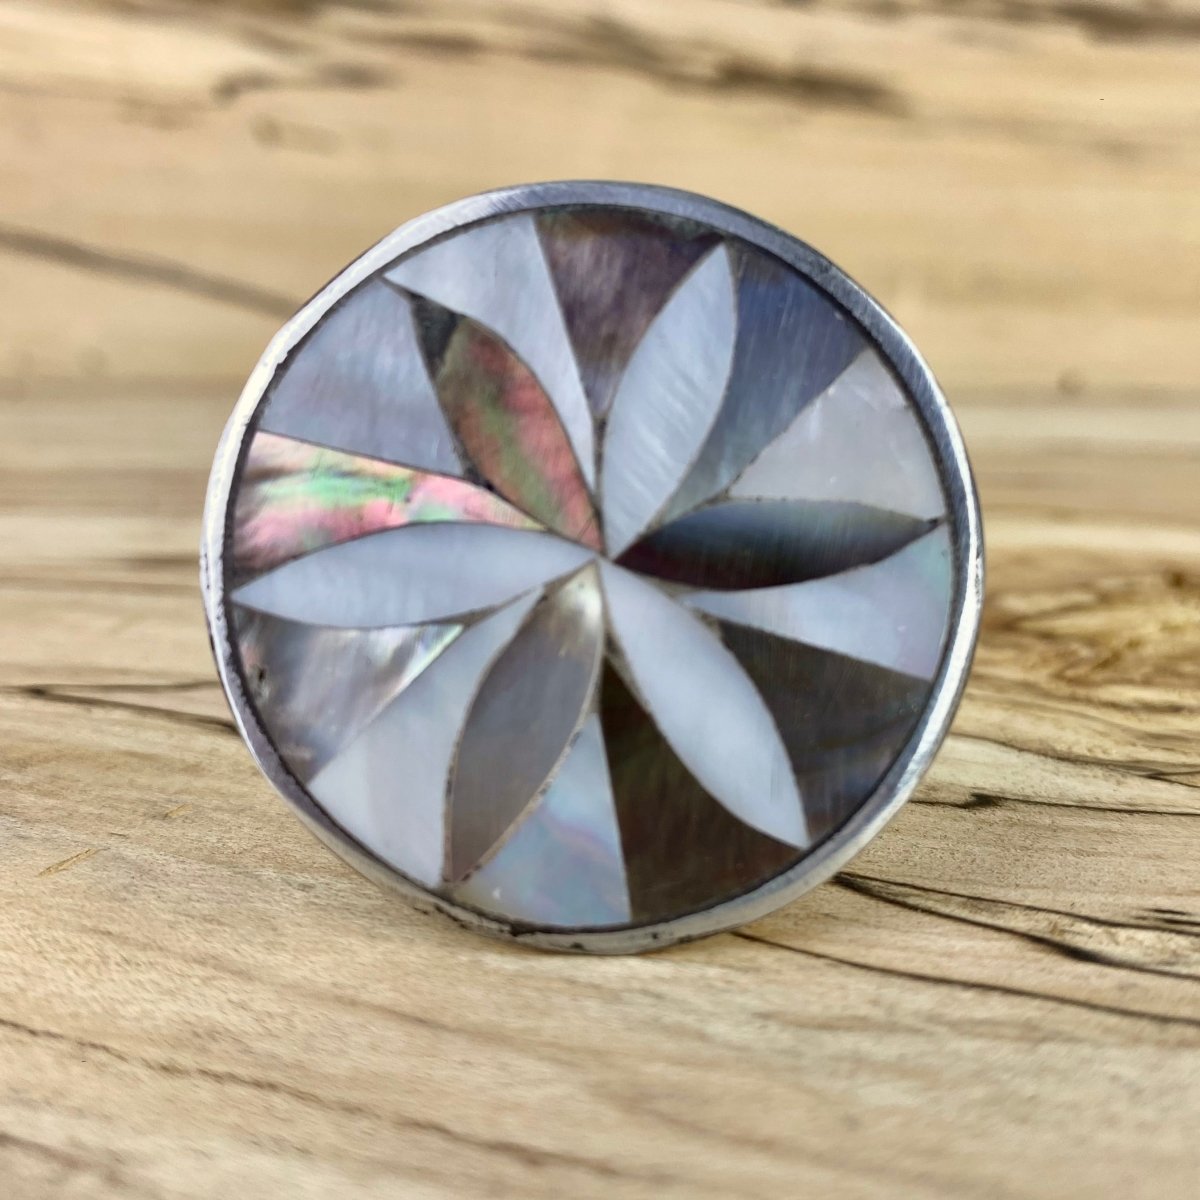 Black and White Mother of Pearl Knob - DaRosa Creations